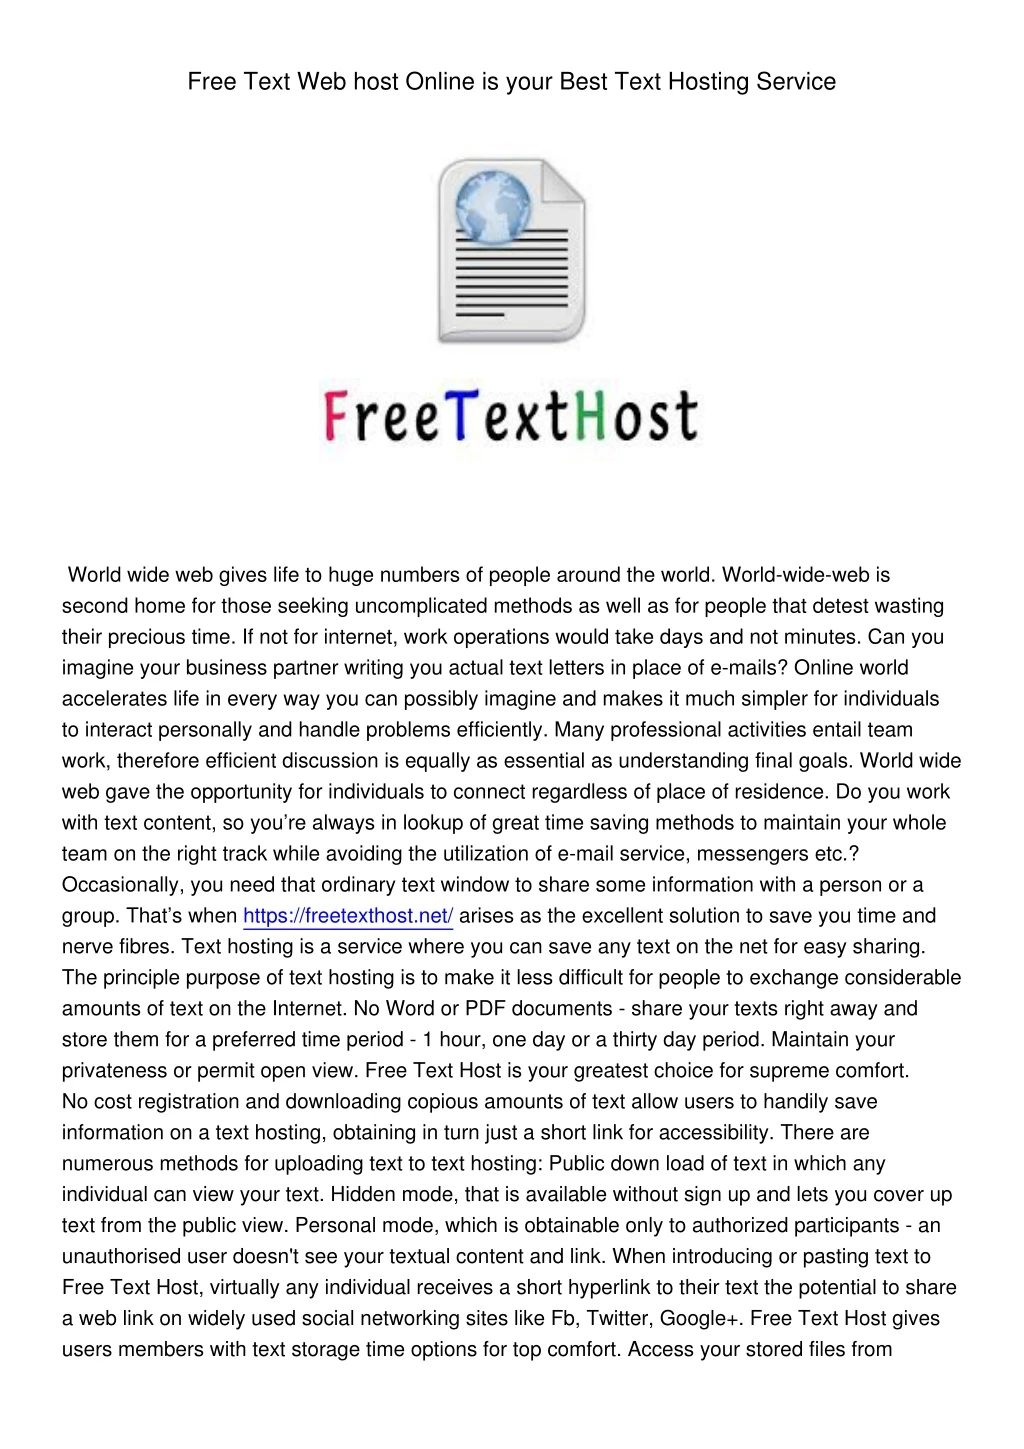 free text web host online is your best text